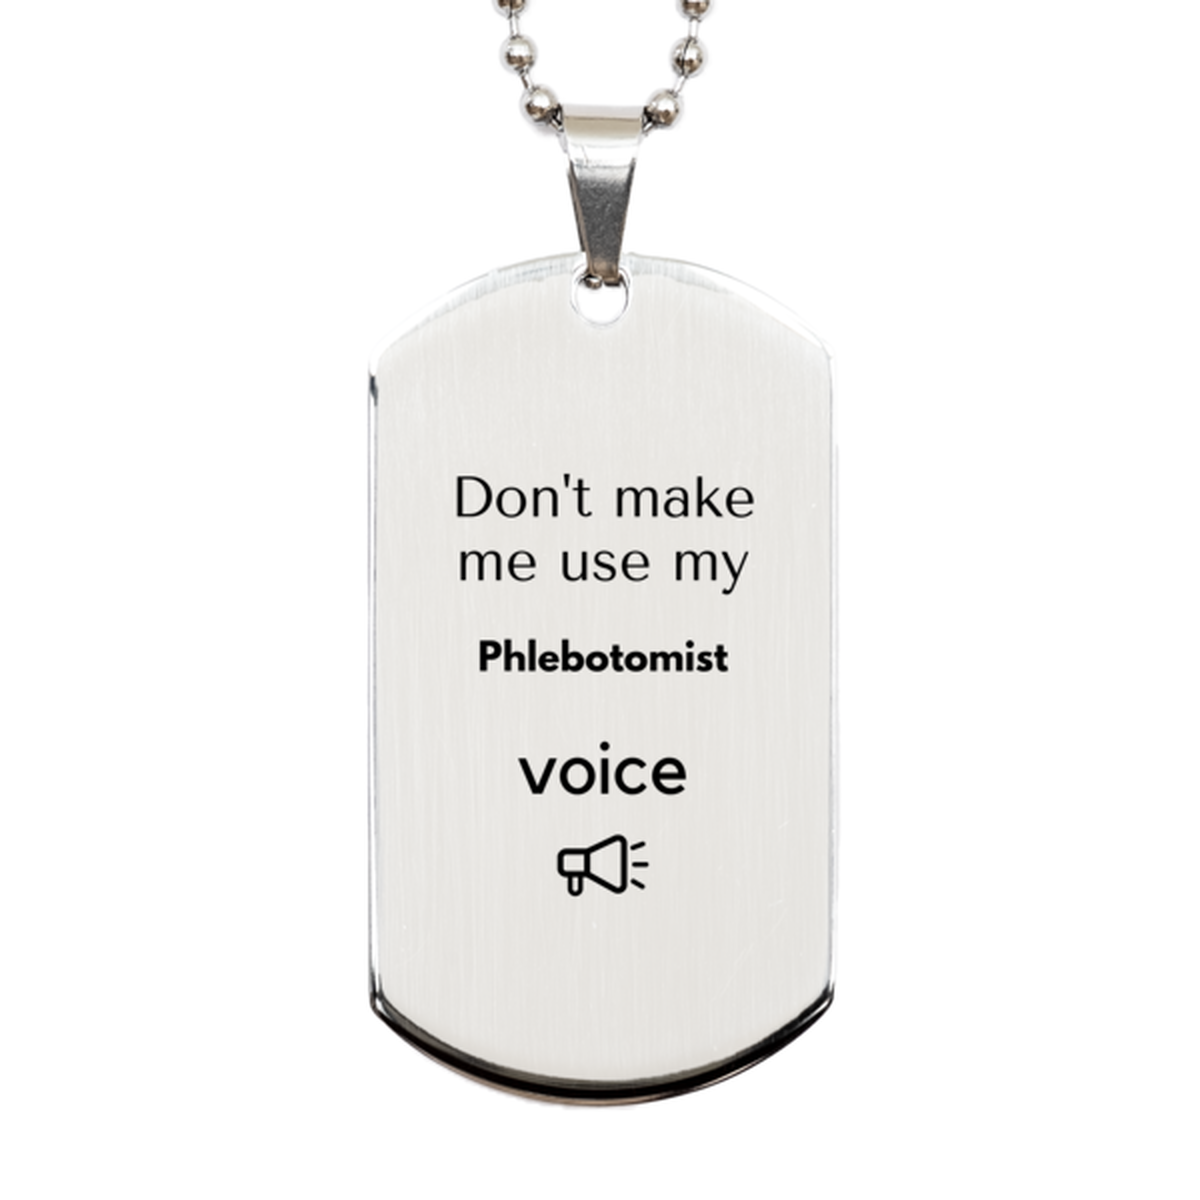 Don't make me use my Phlebotomist voice, Sarcasm Phlebotomist Gifts, Christmas Phlebotomist Silver Dog Tag Birthday Unique Gifts For Phlebotomist Coworkers, Men, Women, Colleague, Friends